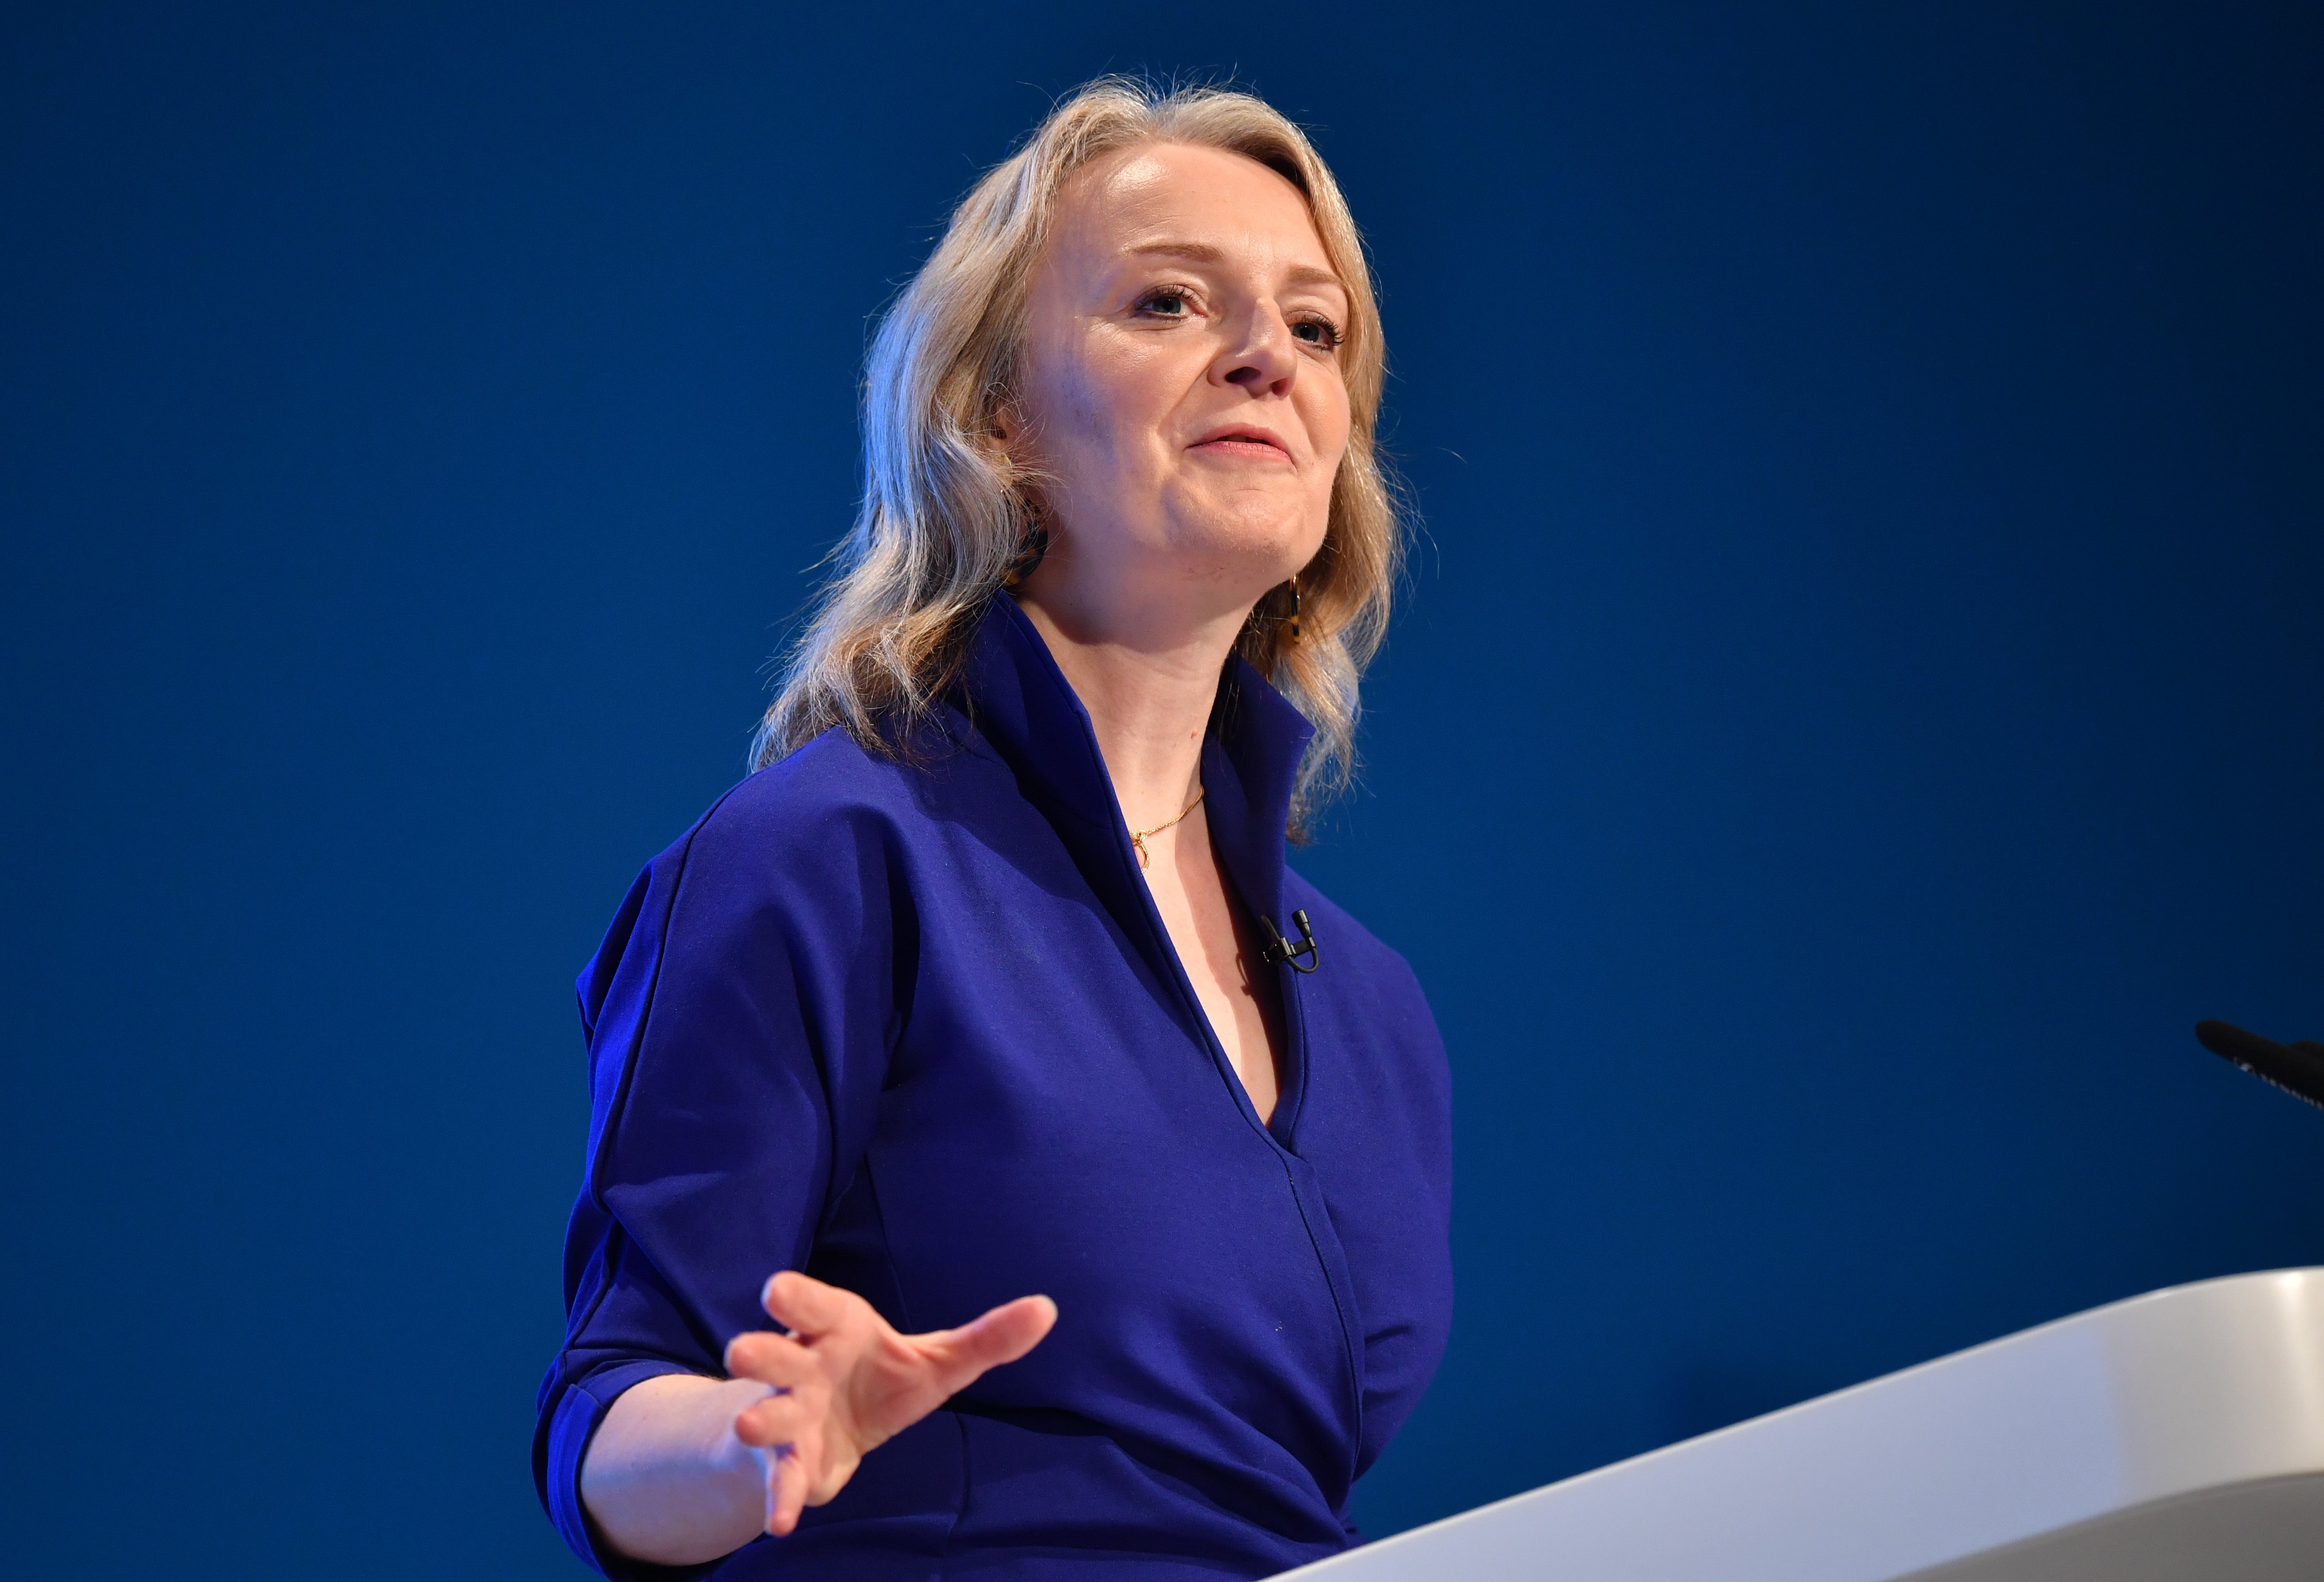 Liz Truss, Secretary of State for International Trade and Minister for Women and Equalities, speaks during the first day of Conservative Party Conference at Manchester Central on September 29, 2019 in Manchester, England.